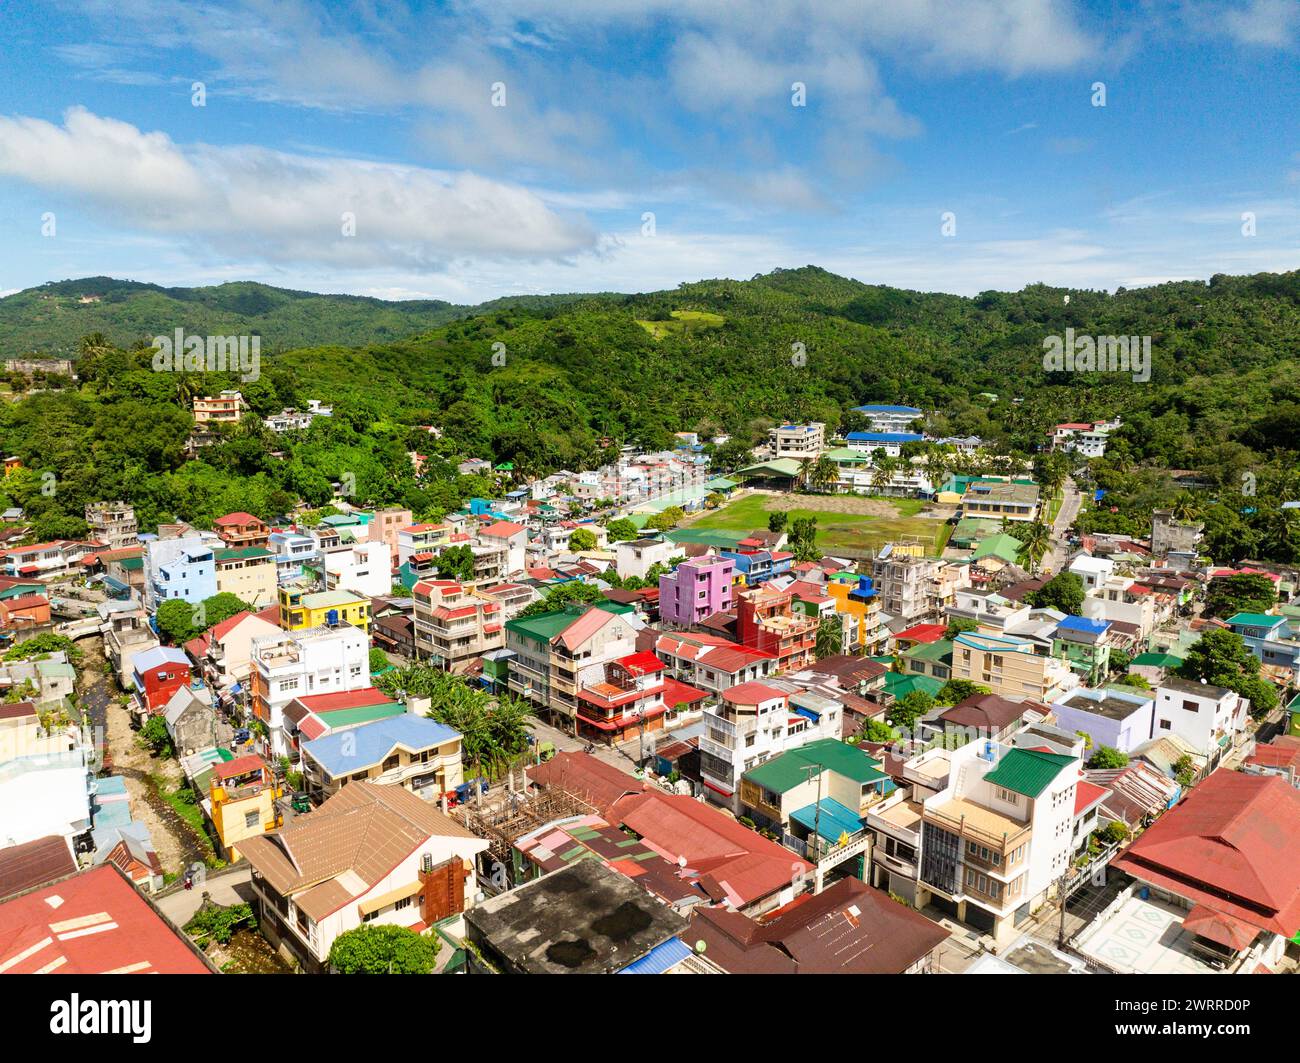 Drone view of residential buildings in downtown near mountain in Romblon Island, Romblon, Philippines. Stock Photo